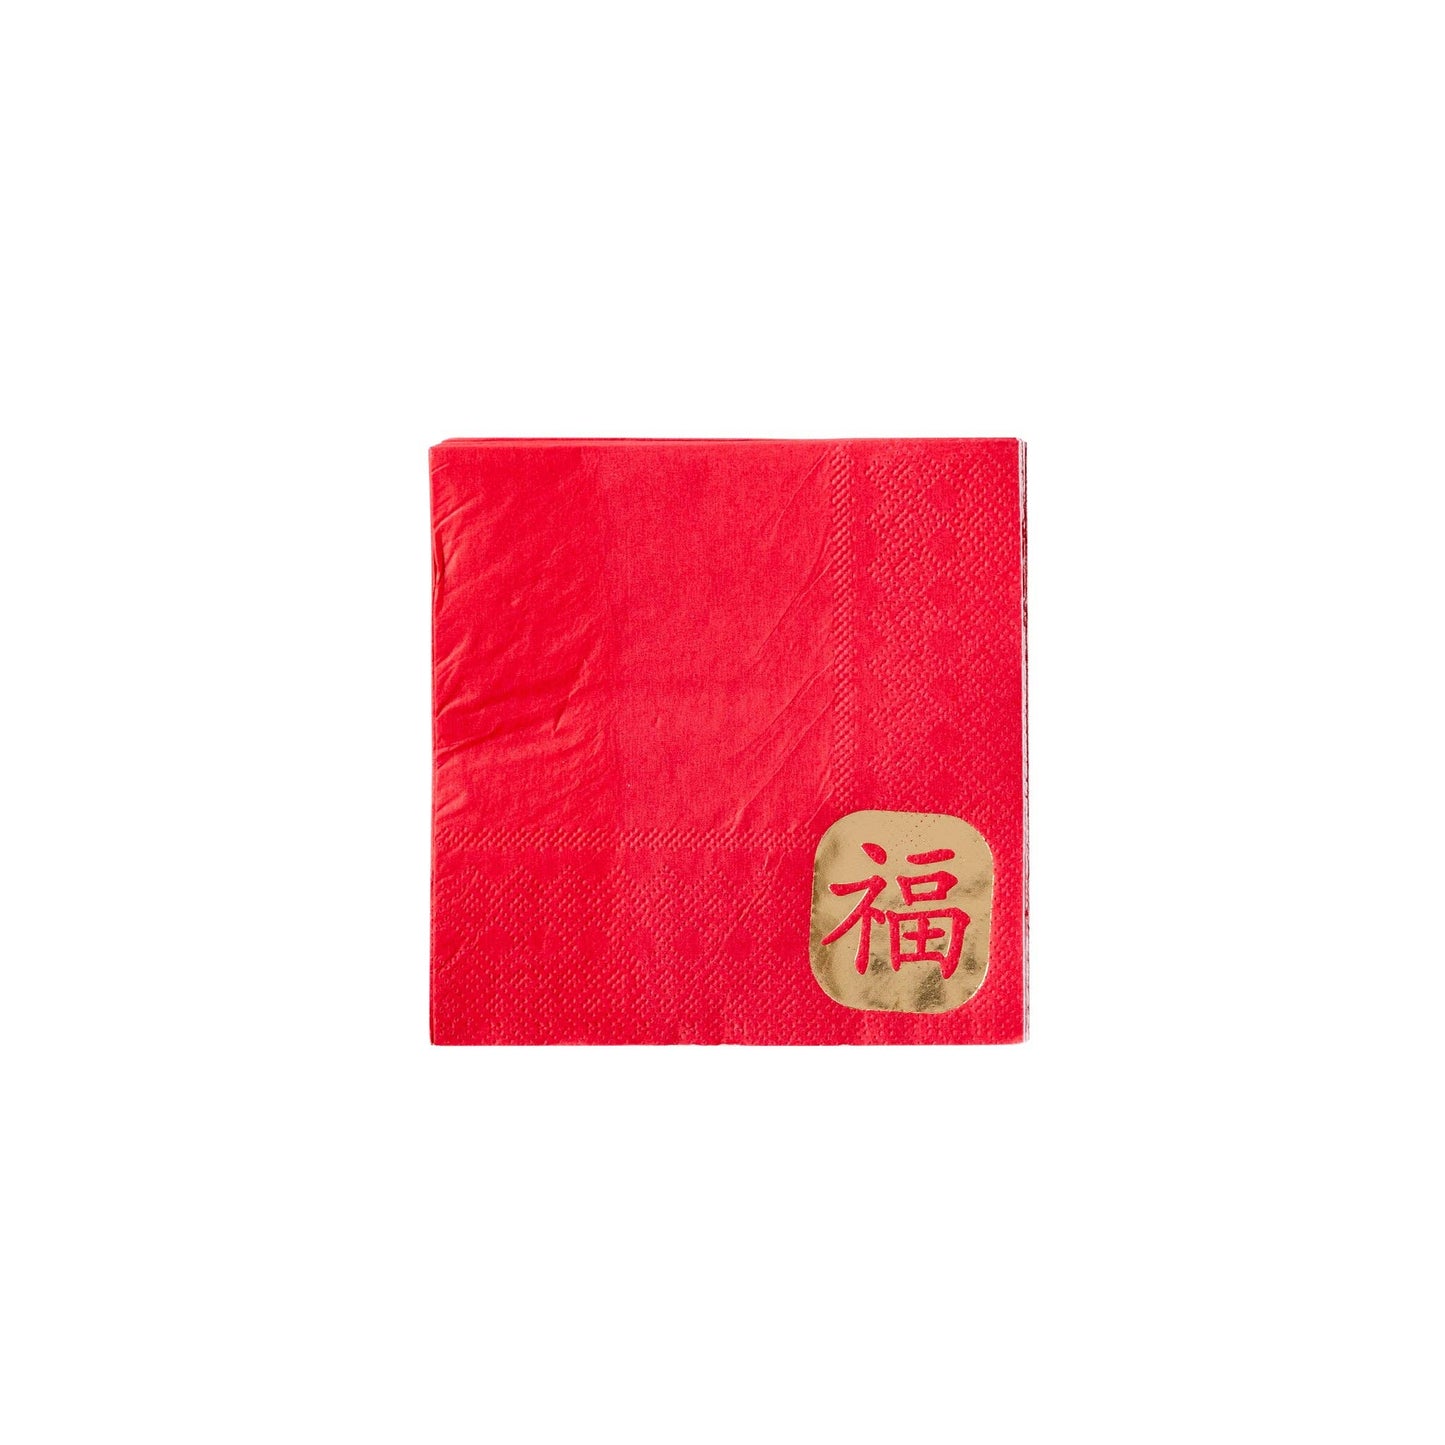 Lunar New Year Foiled Good Fortune Cocktail Napkin (32 Count)